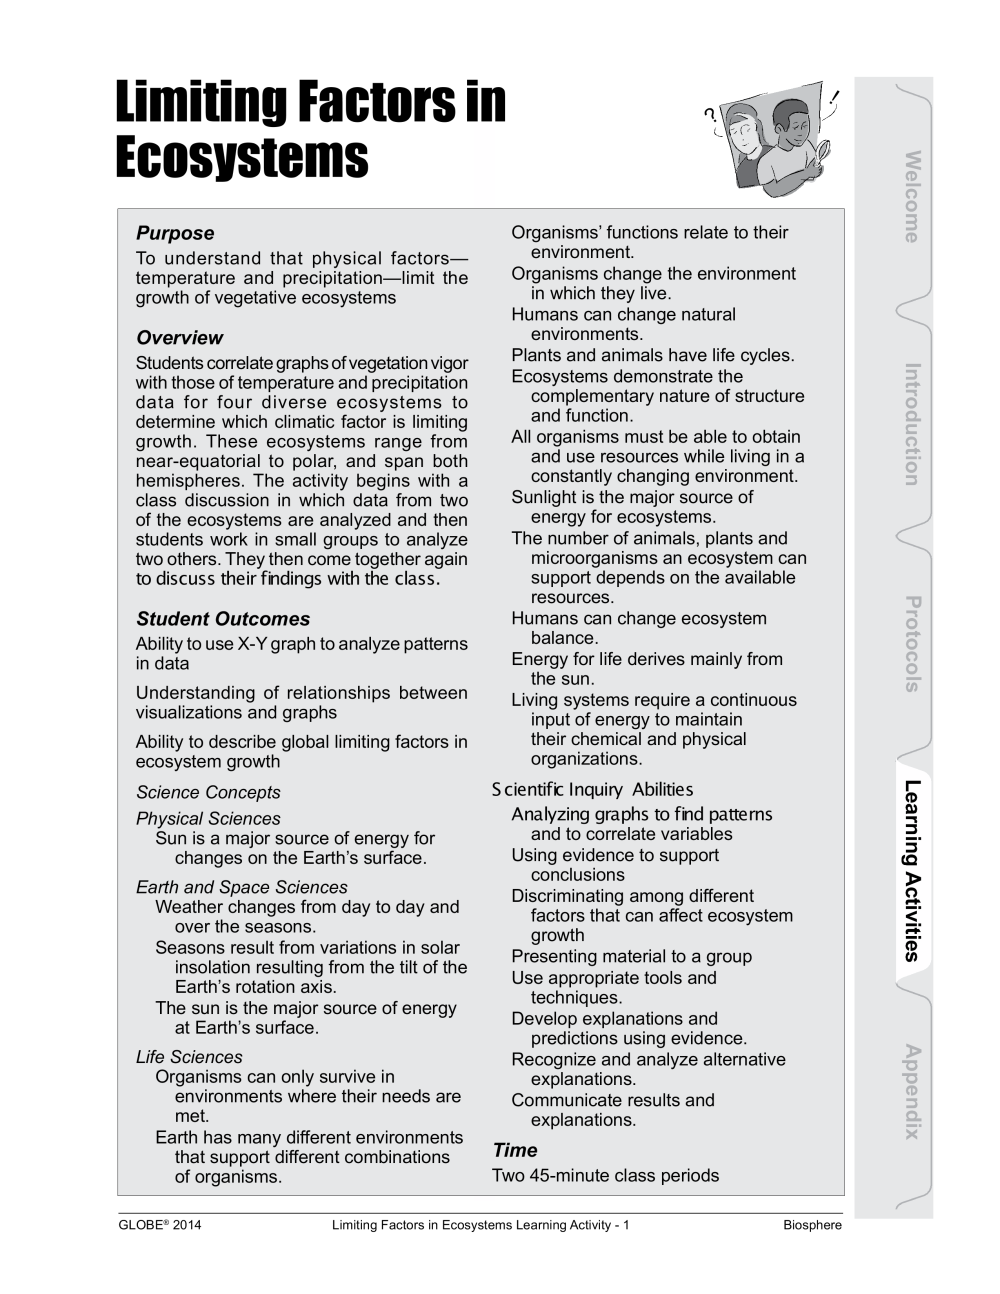 Learning Activities preview for P7 Limiting Factors in Ecosystems (pdf)